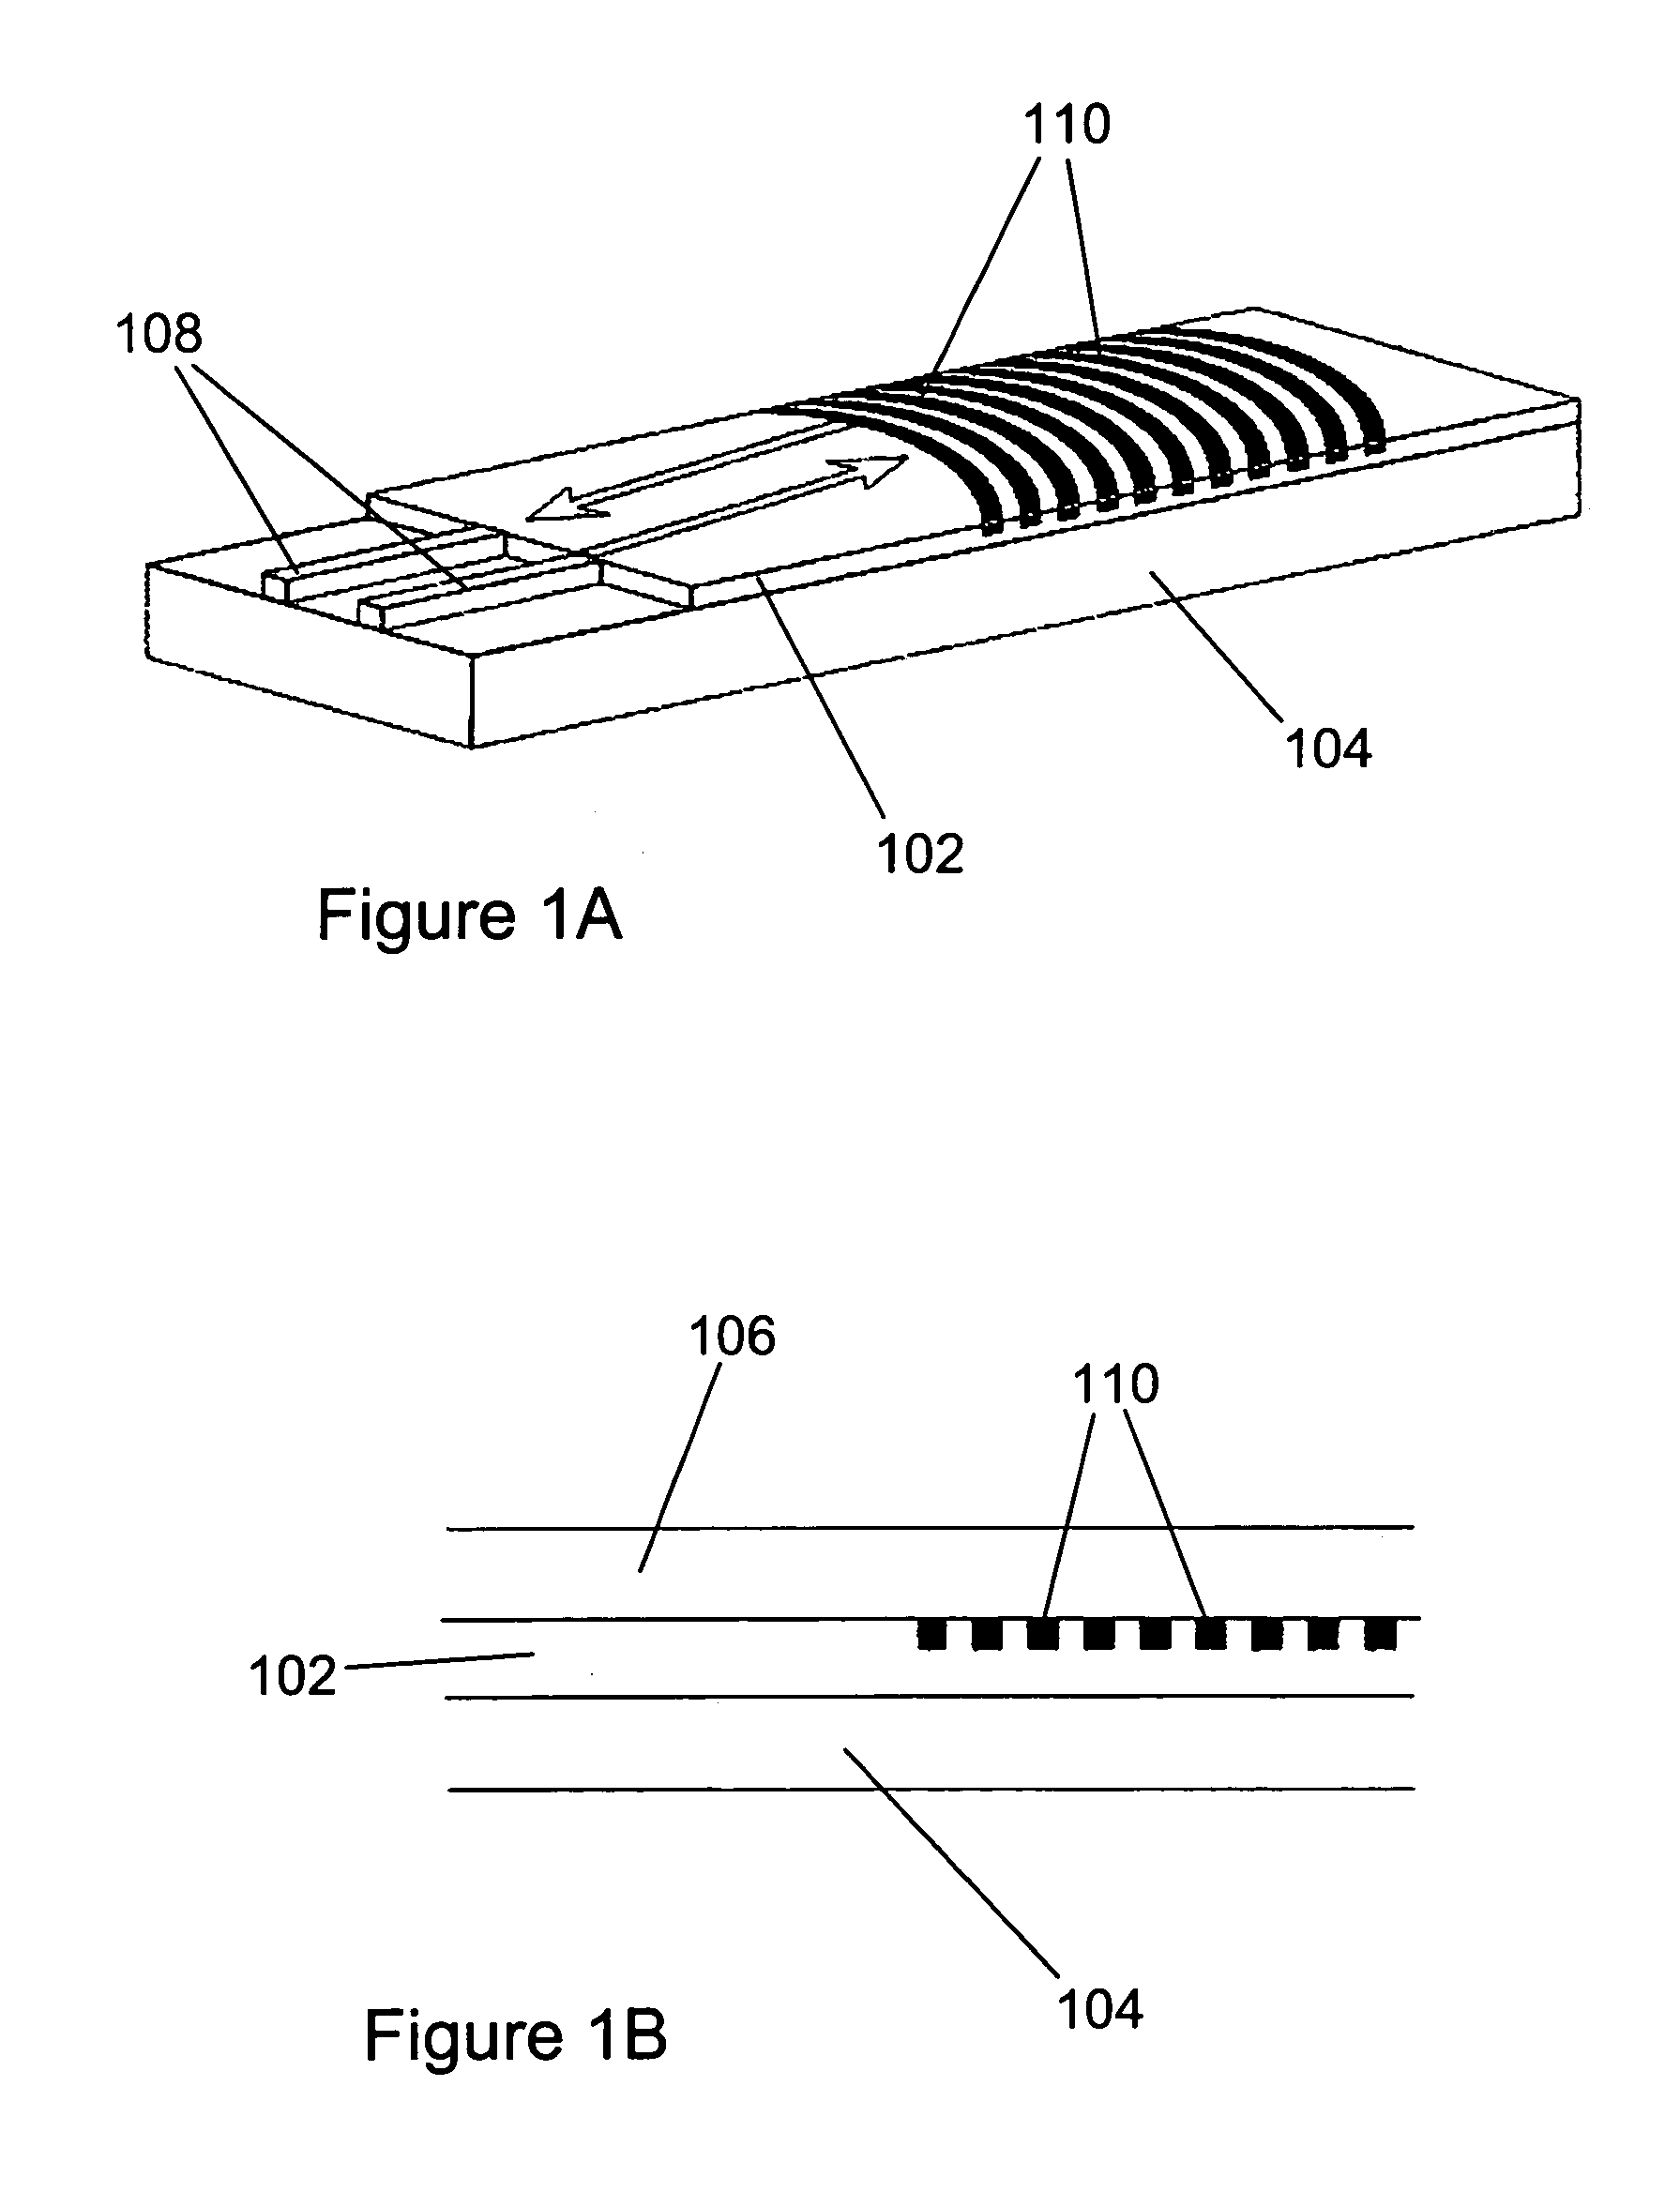 Optical time delay apparatus incorporating diffractive element sets